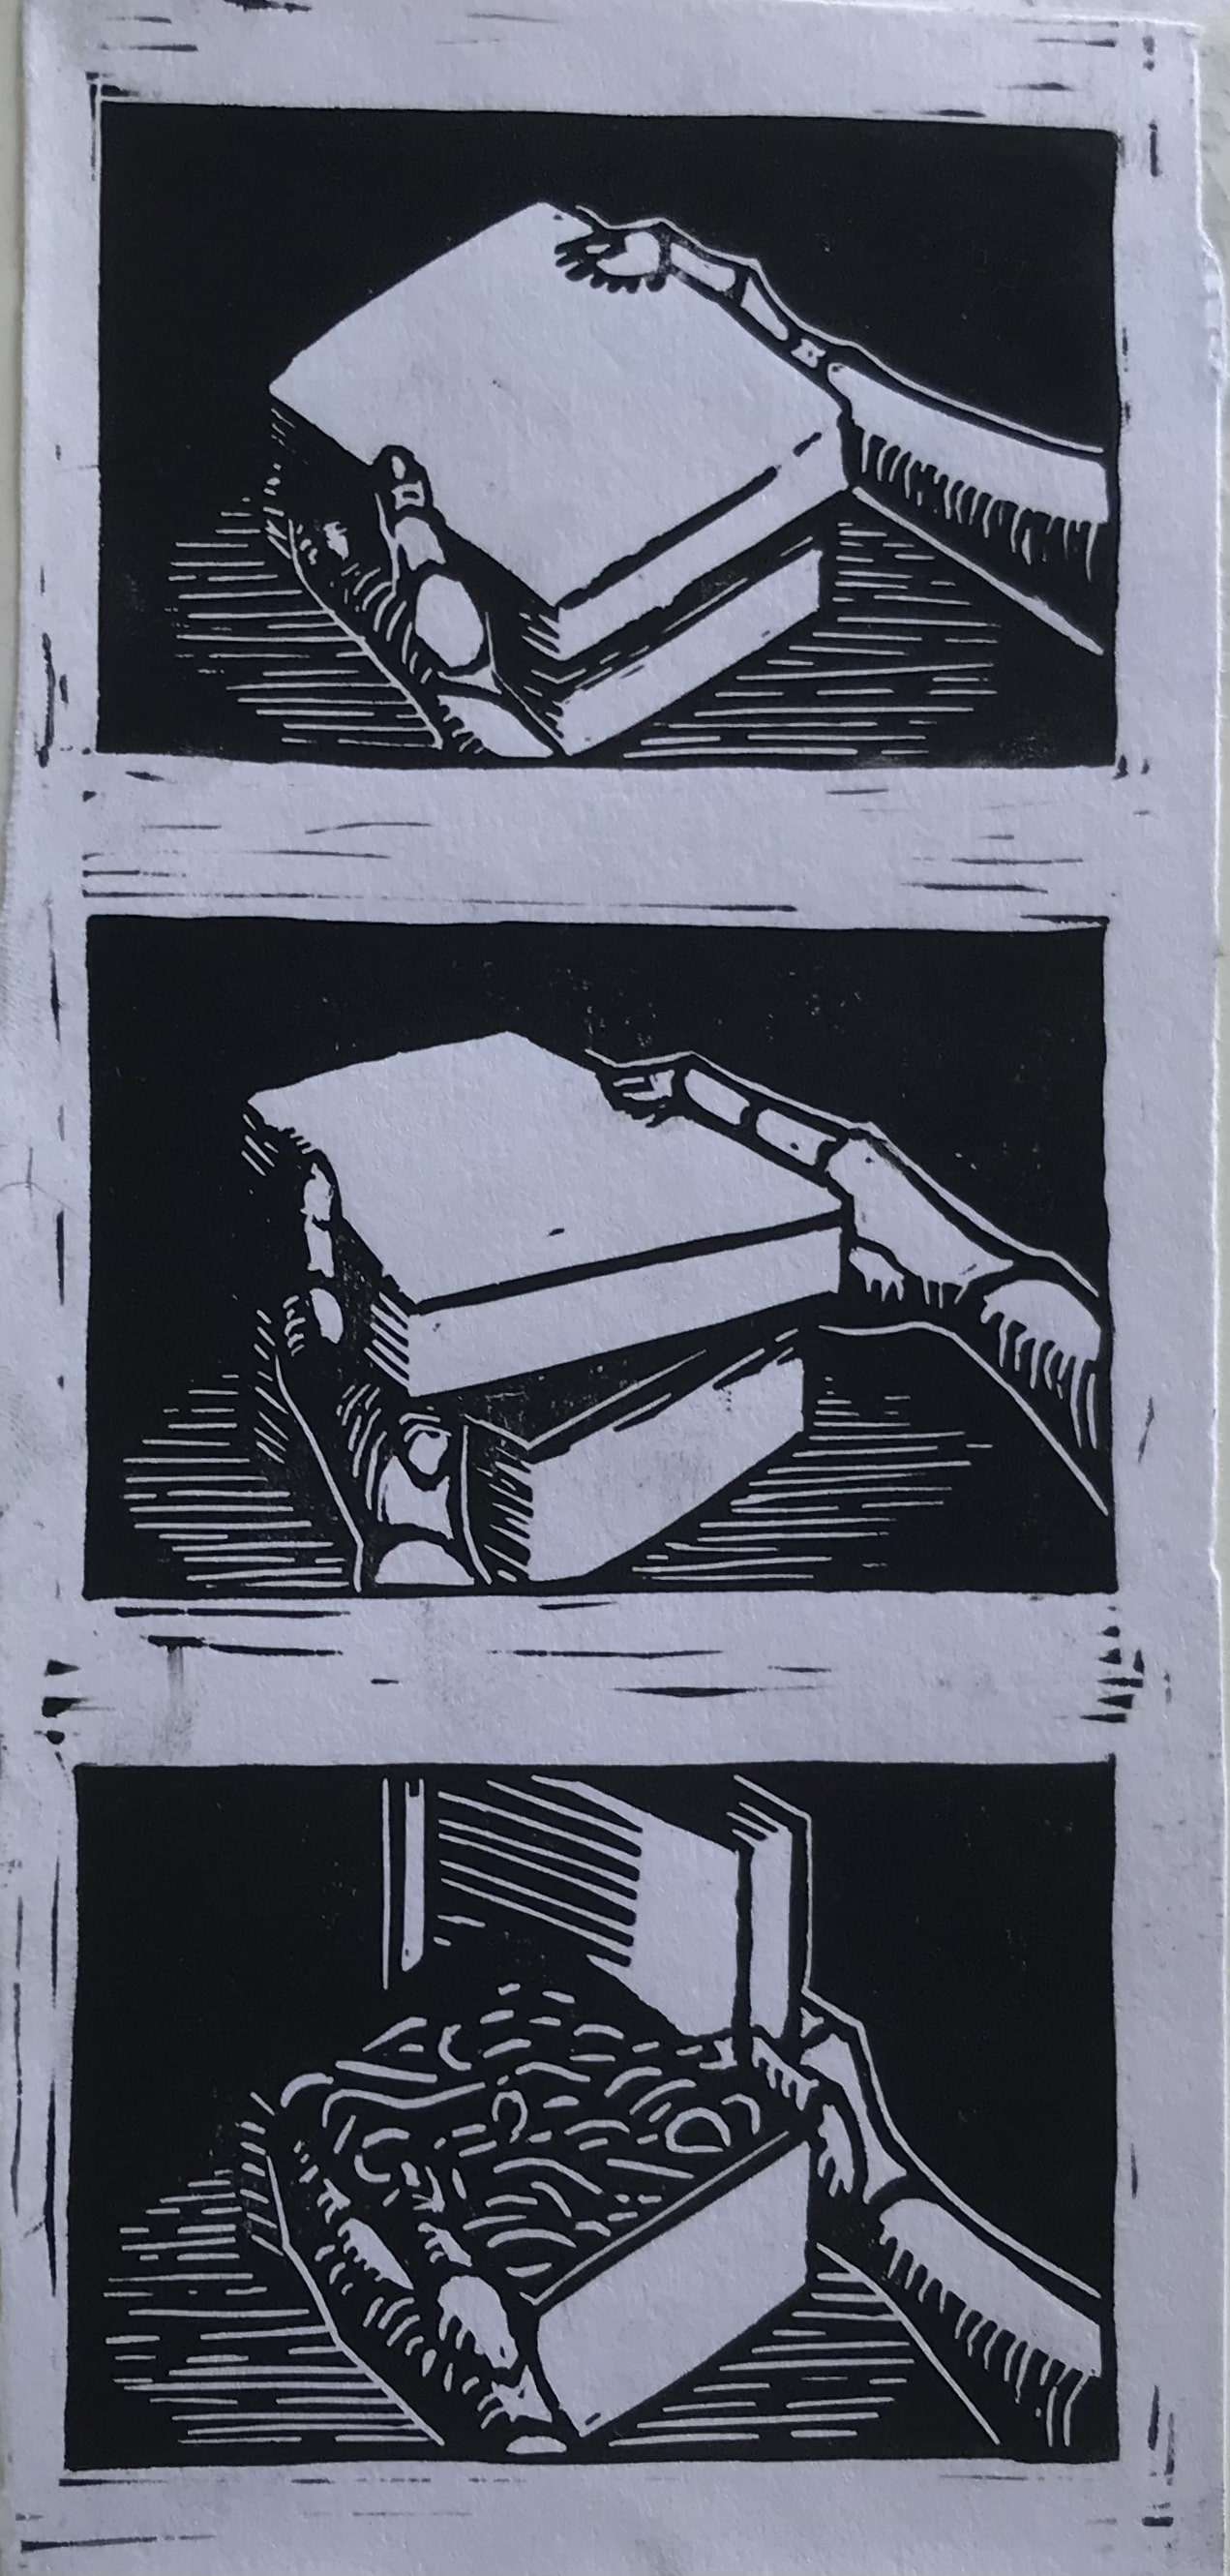 a three panel linocut print in black and white.  first panel: two hands hold a small box. second panel: the hands begin to lift the box's lid, holding it slightly open.  third panel: the hands hold the box and lid, now open.  the box is full of worms.